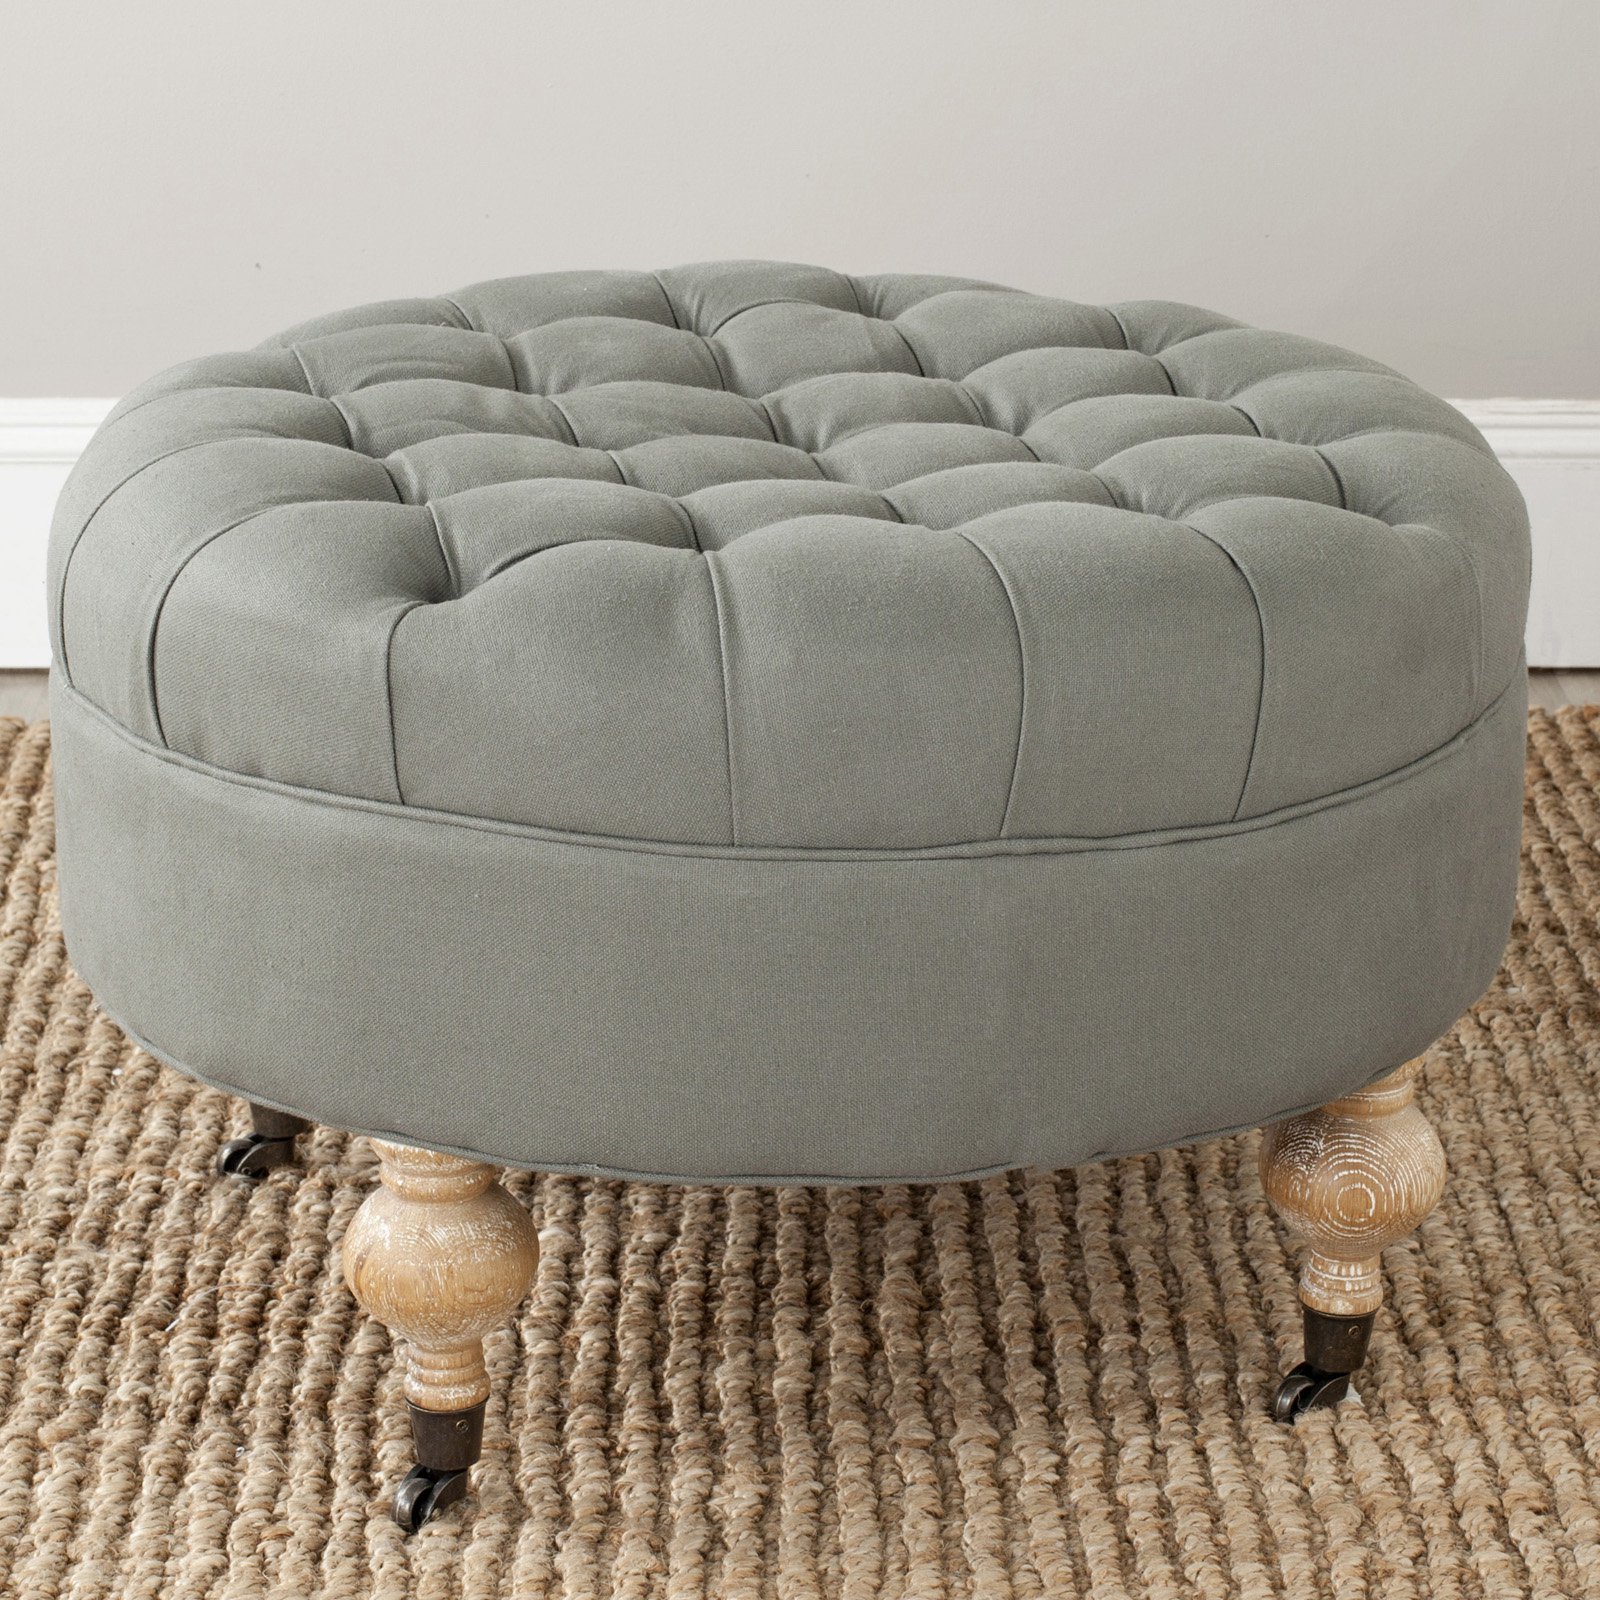 Safavieh Clara Classic Rustic Tufted Round Ottoman with Casters - image 2 of 2